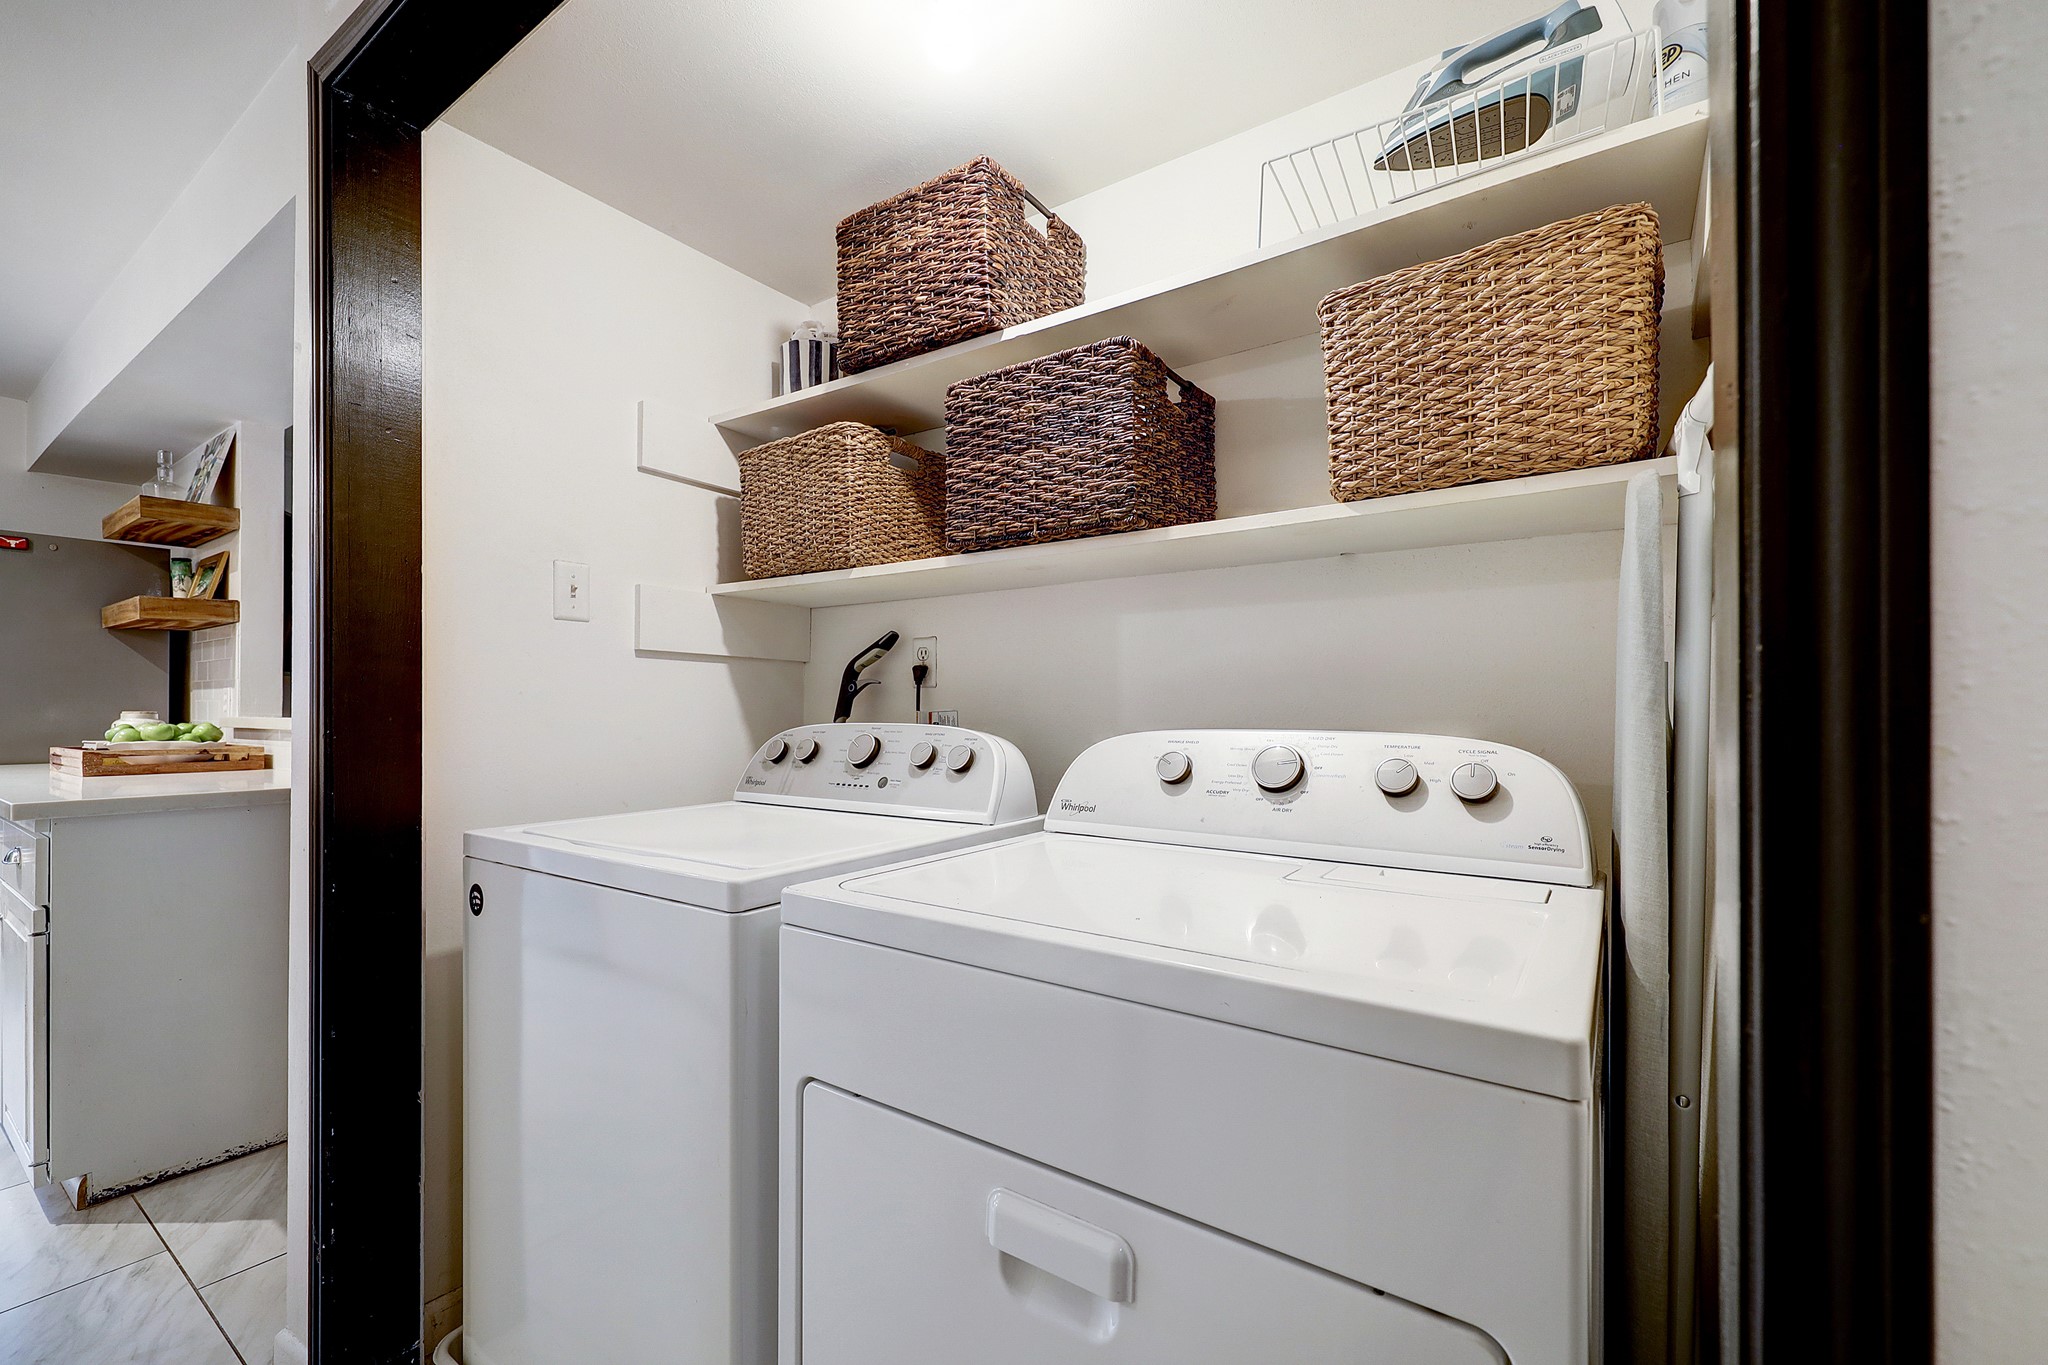 Laundry area is adjacent to the pantry, kitchen and downstairs powder bath.